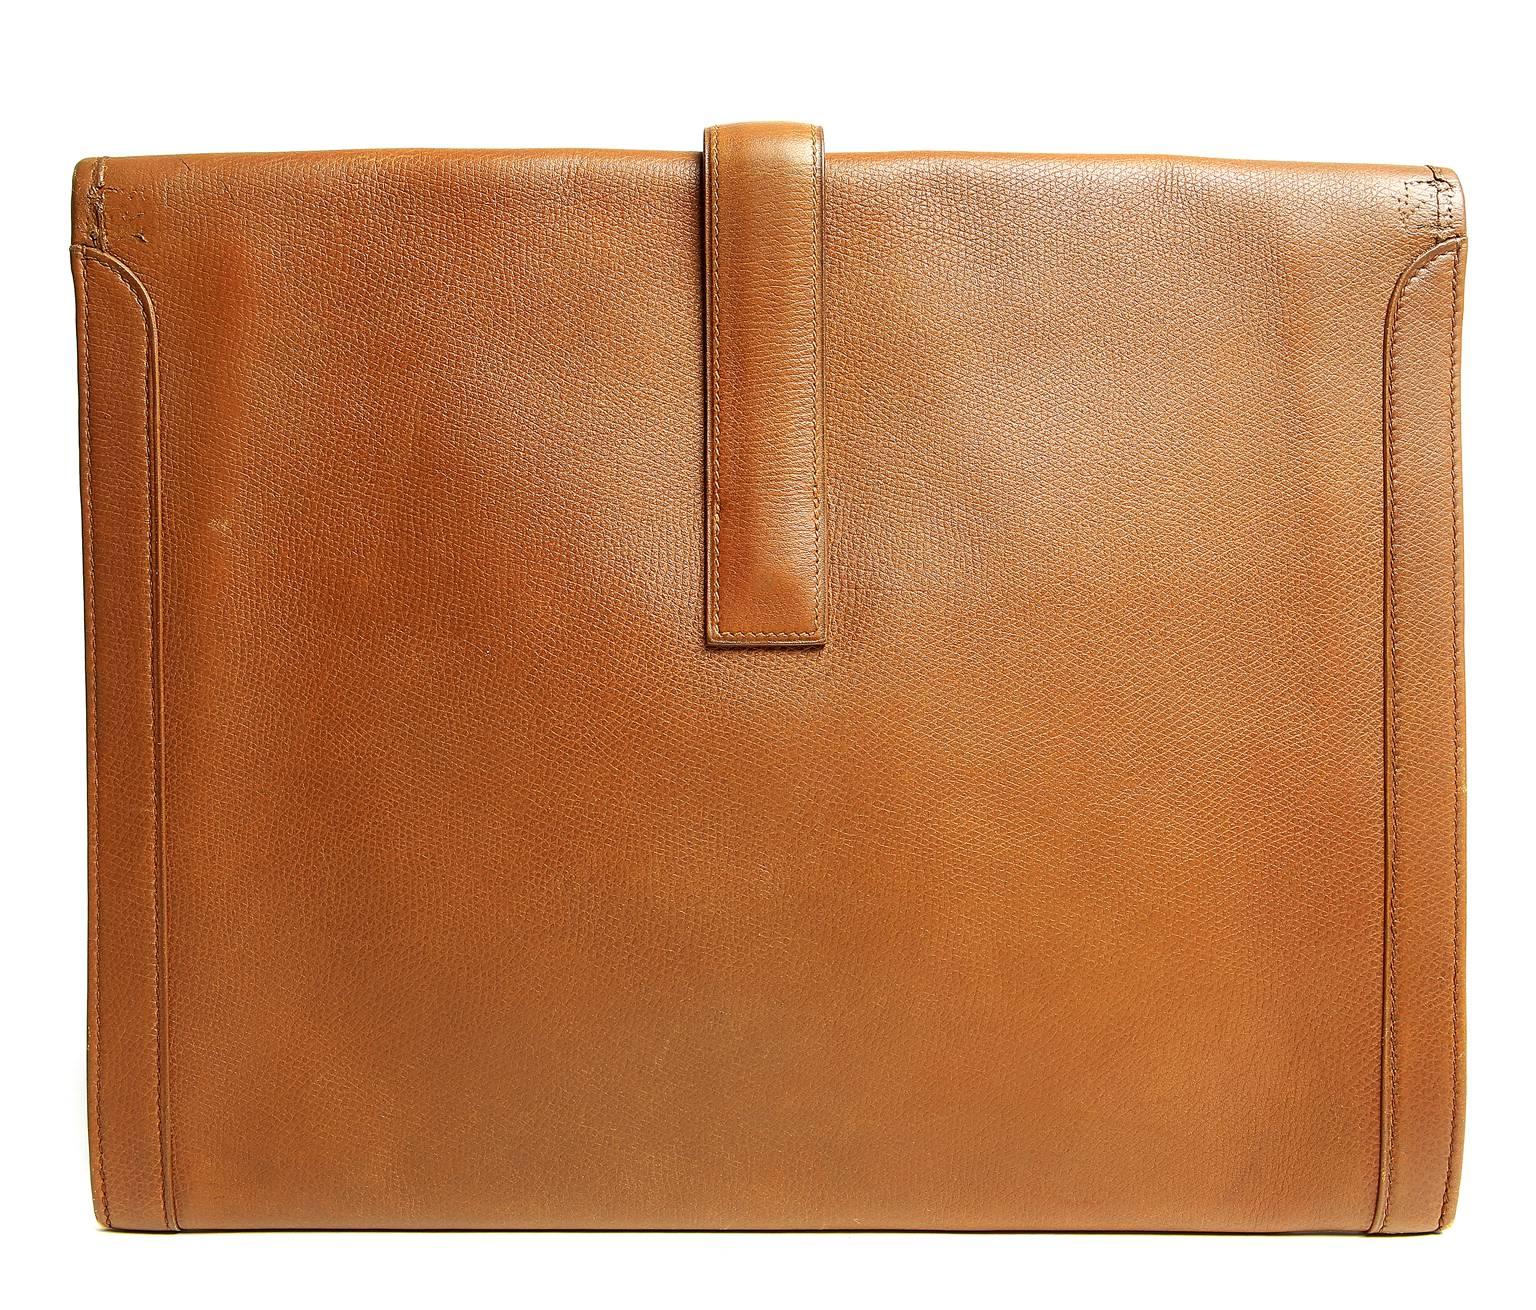 Hermès Vintage Cognac Leather Jumbo Jige Clutch - pristine condition
  The unisex style is perfect for carrying documents as well as personal belongings. 
 
Golden cognac leather has a fine grained texture and is complementary with nearly every